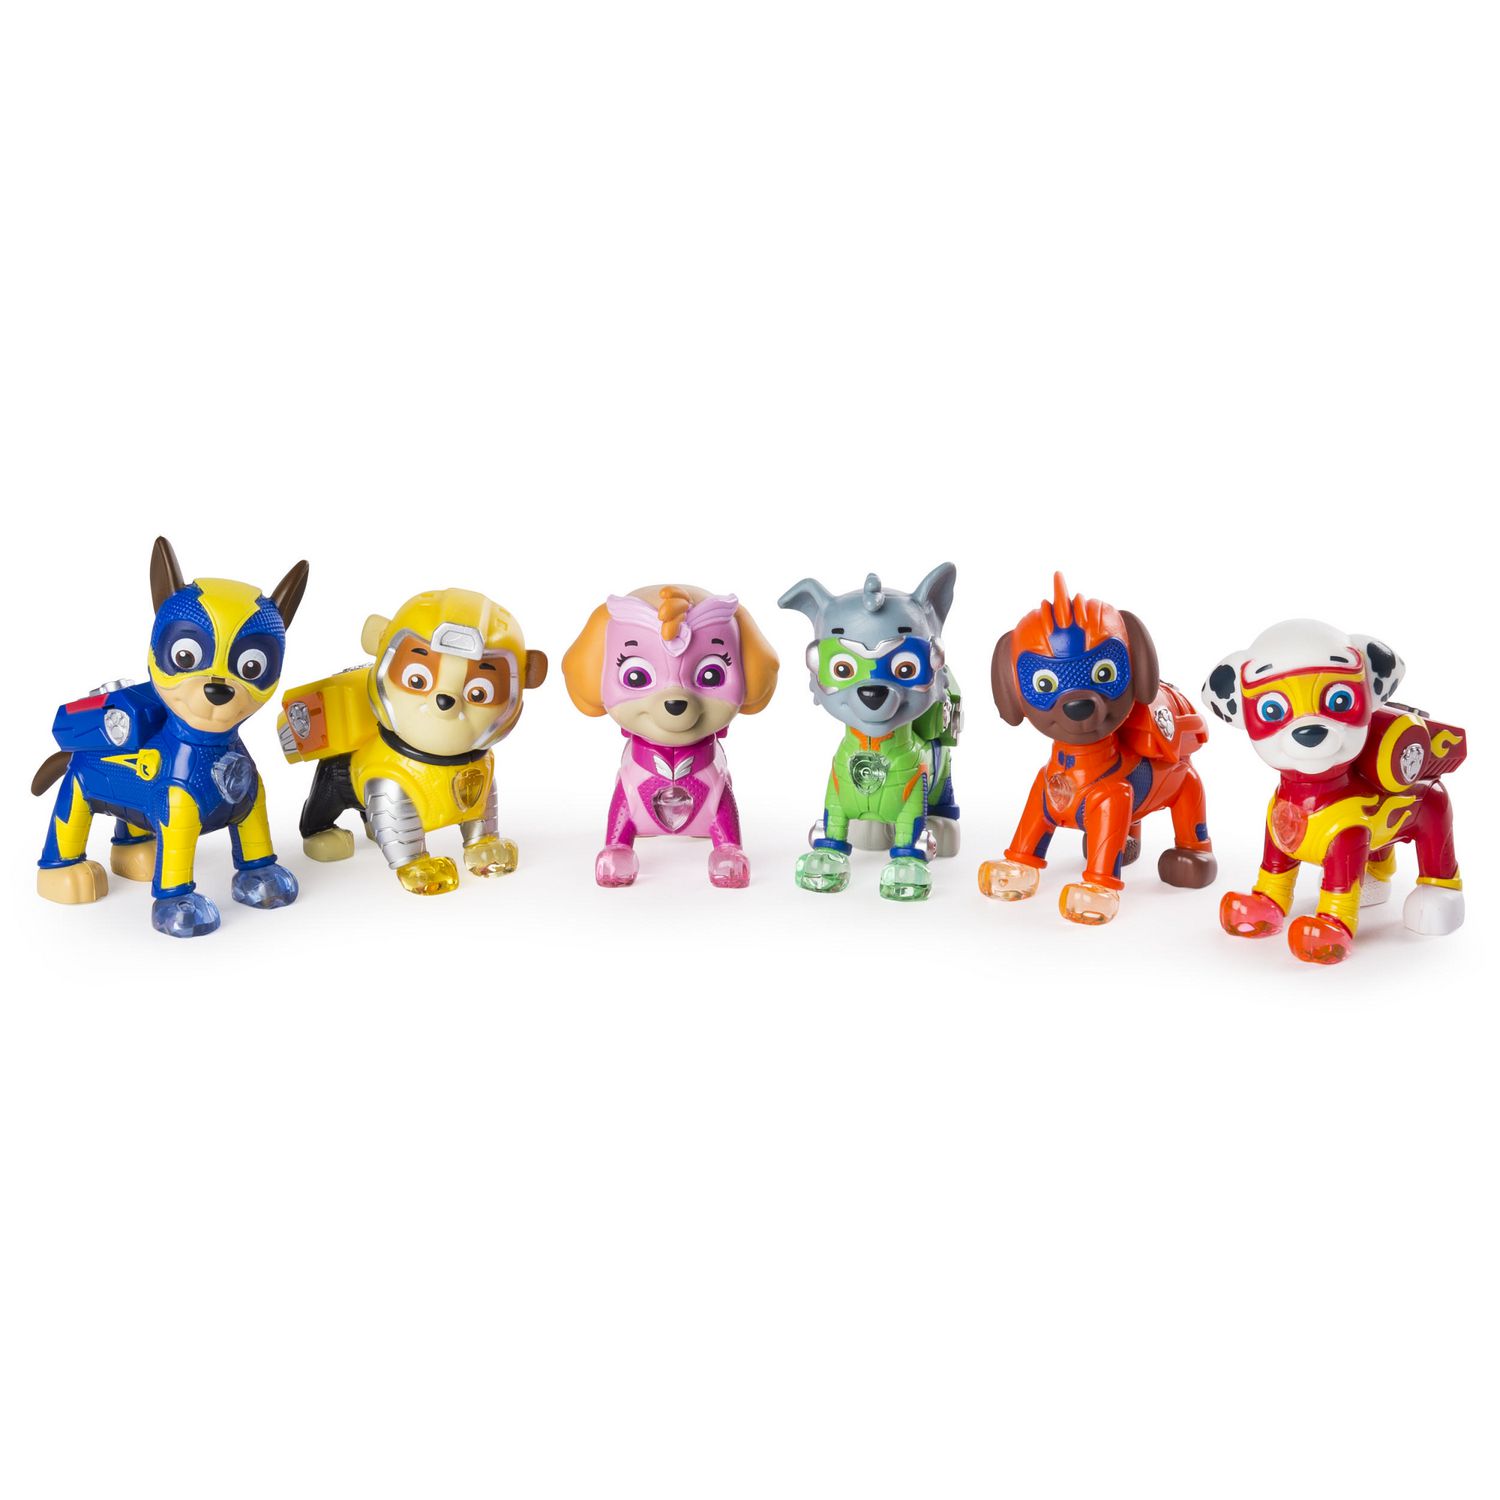 PAW Patrol Mighty Pups 6Pack Gift Set, PAW Patrol Figures with Light